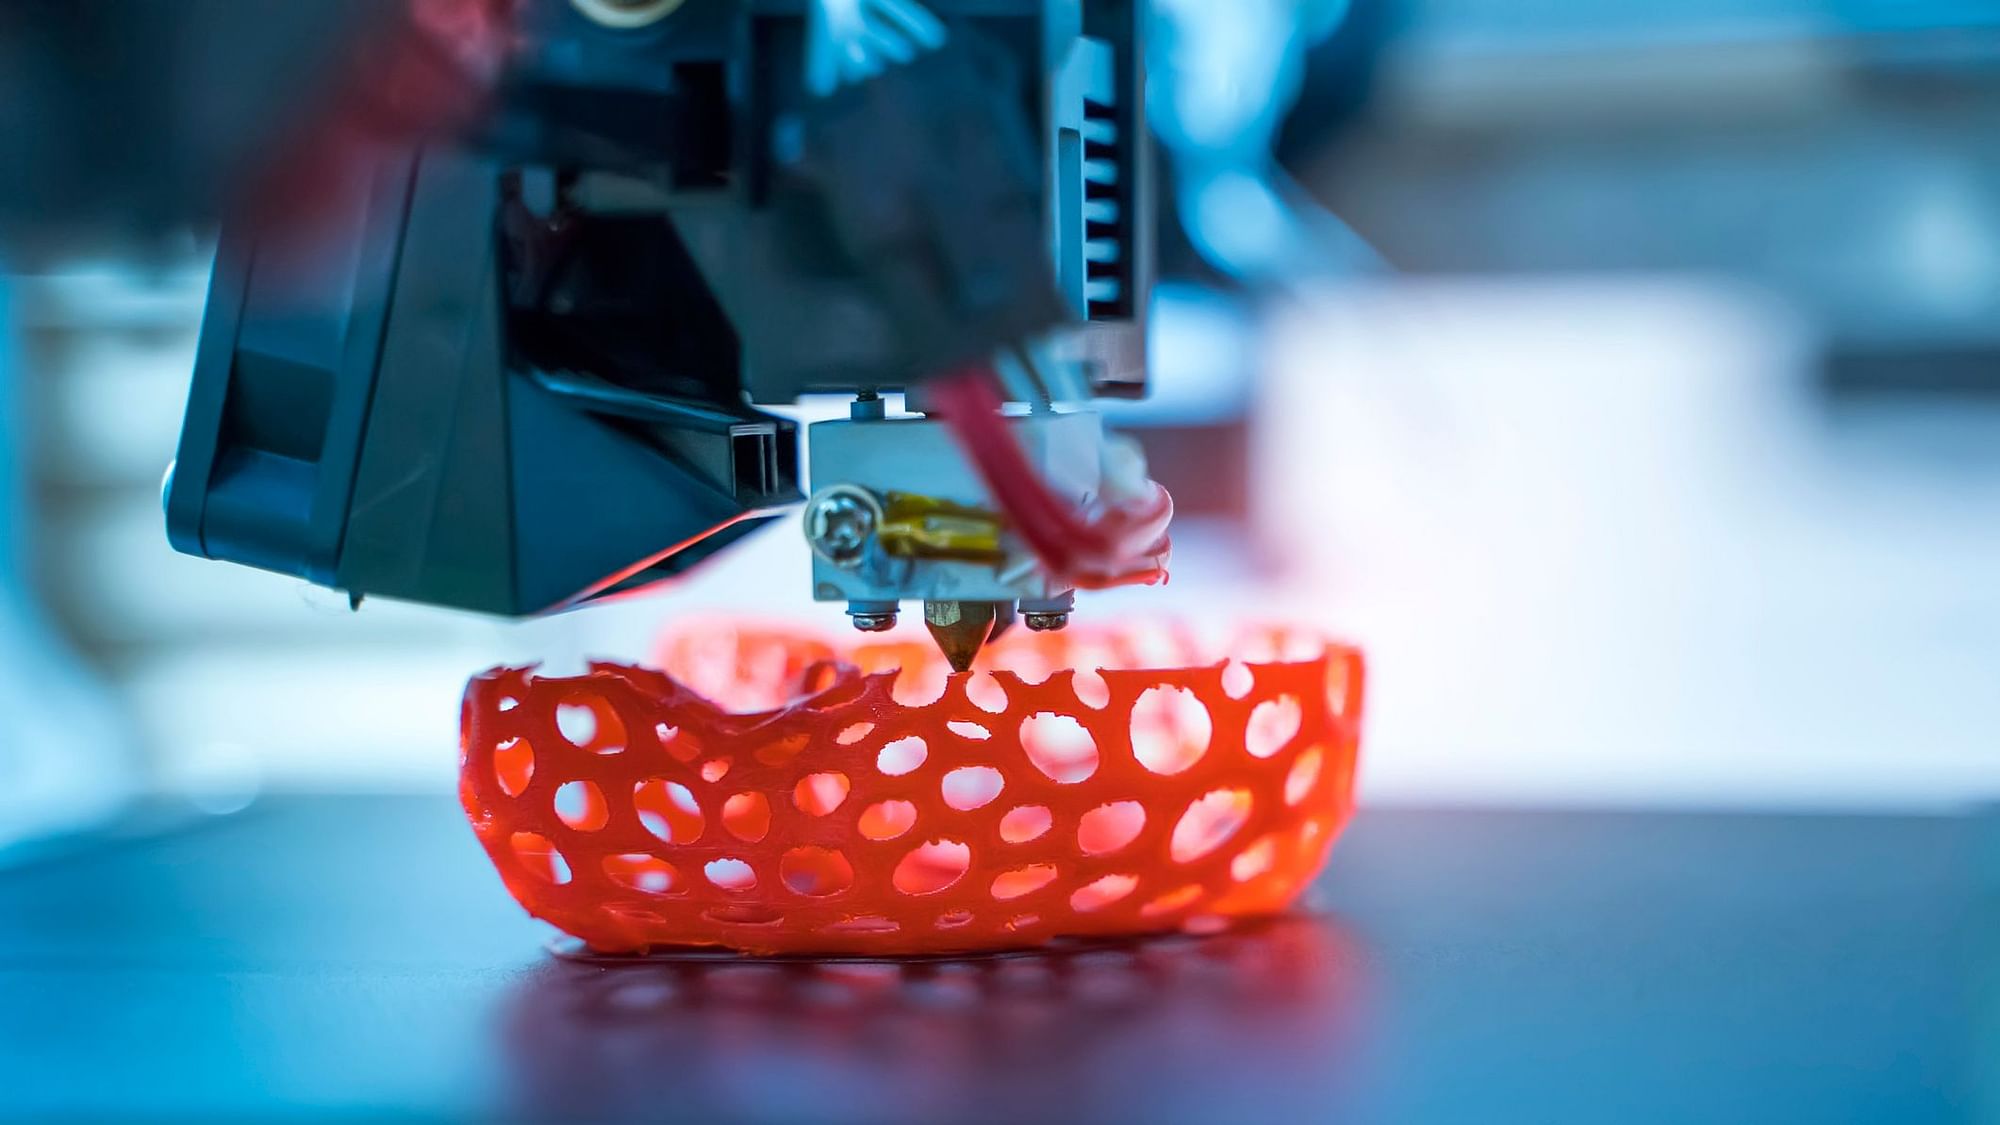 These tests indicate that exposure to these filament particles of 3D printers could over time be as toxic as the air in an urban environment polluted with vehicular or other emissions.